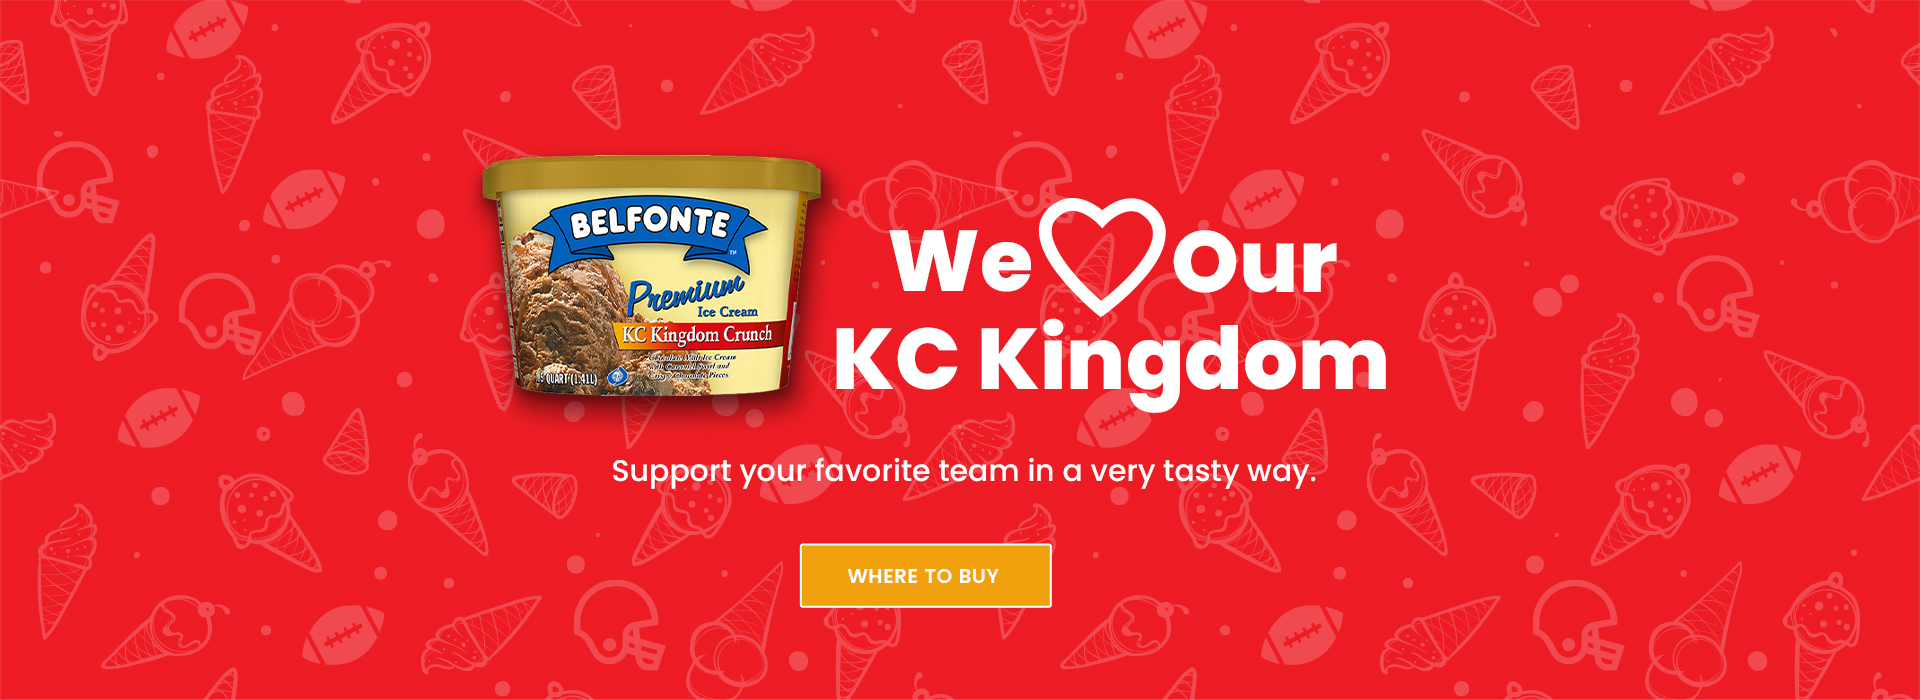 We Love Our KC Kingdom. Support your favorite team in a very tasty way.